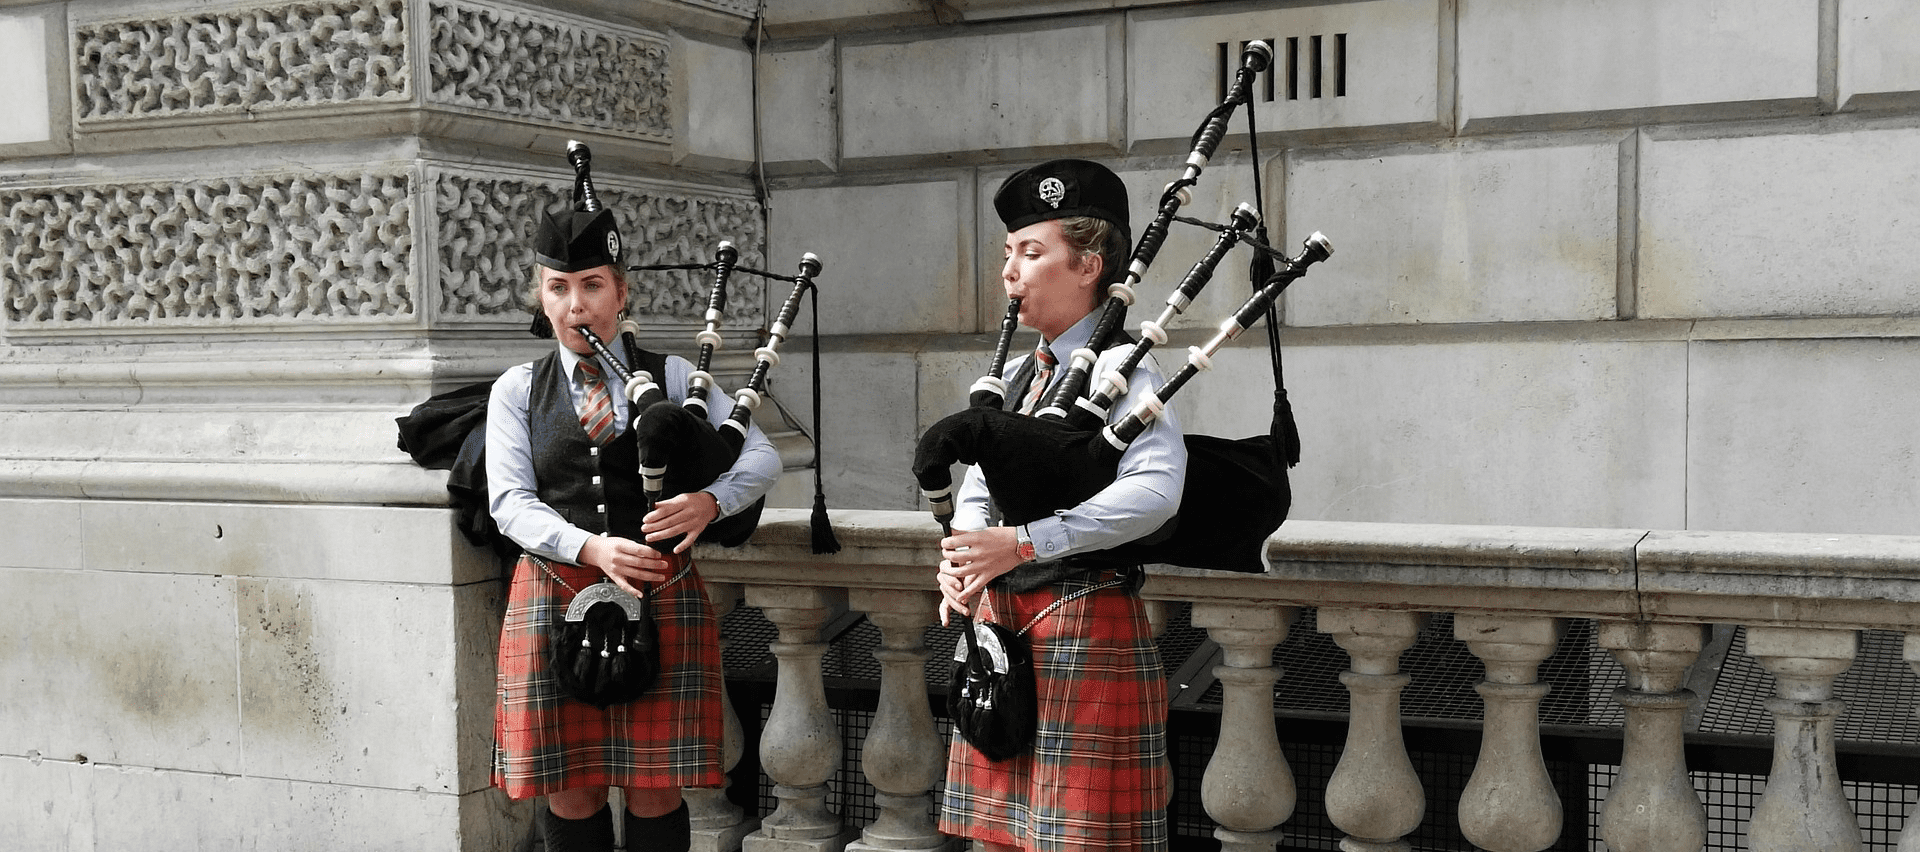 Bagpipe Music Unlimited